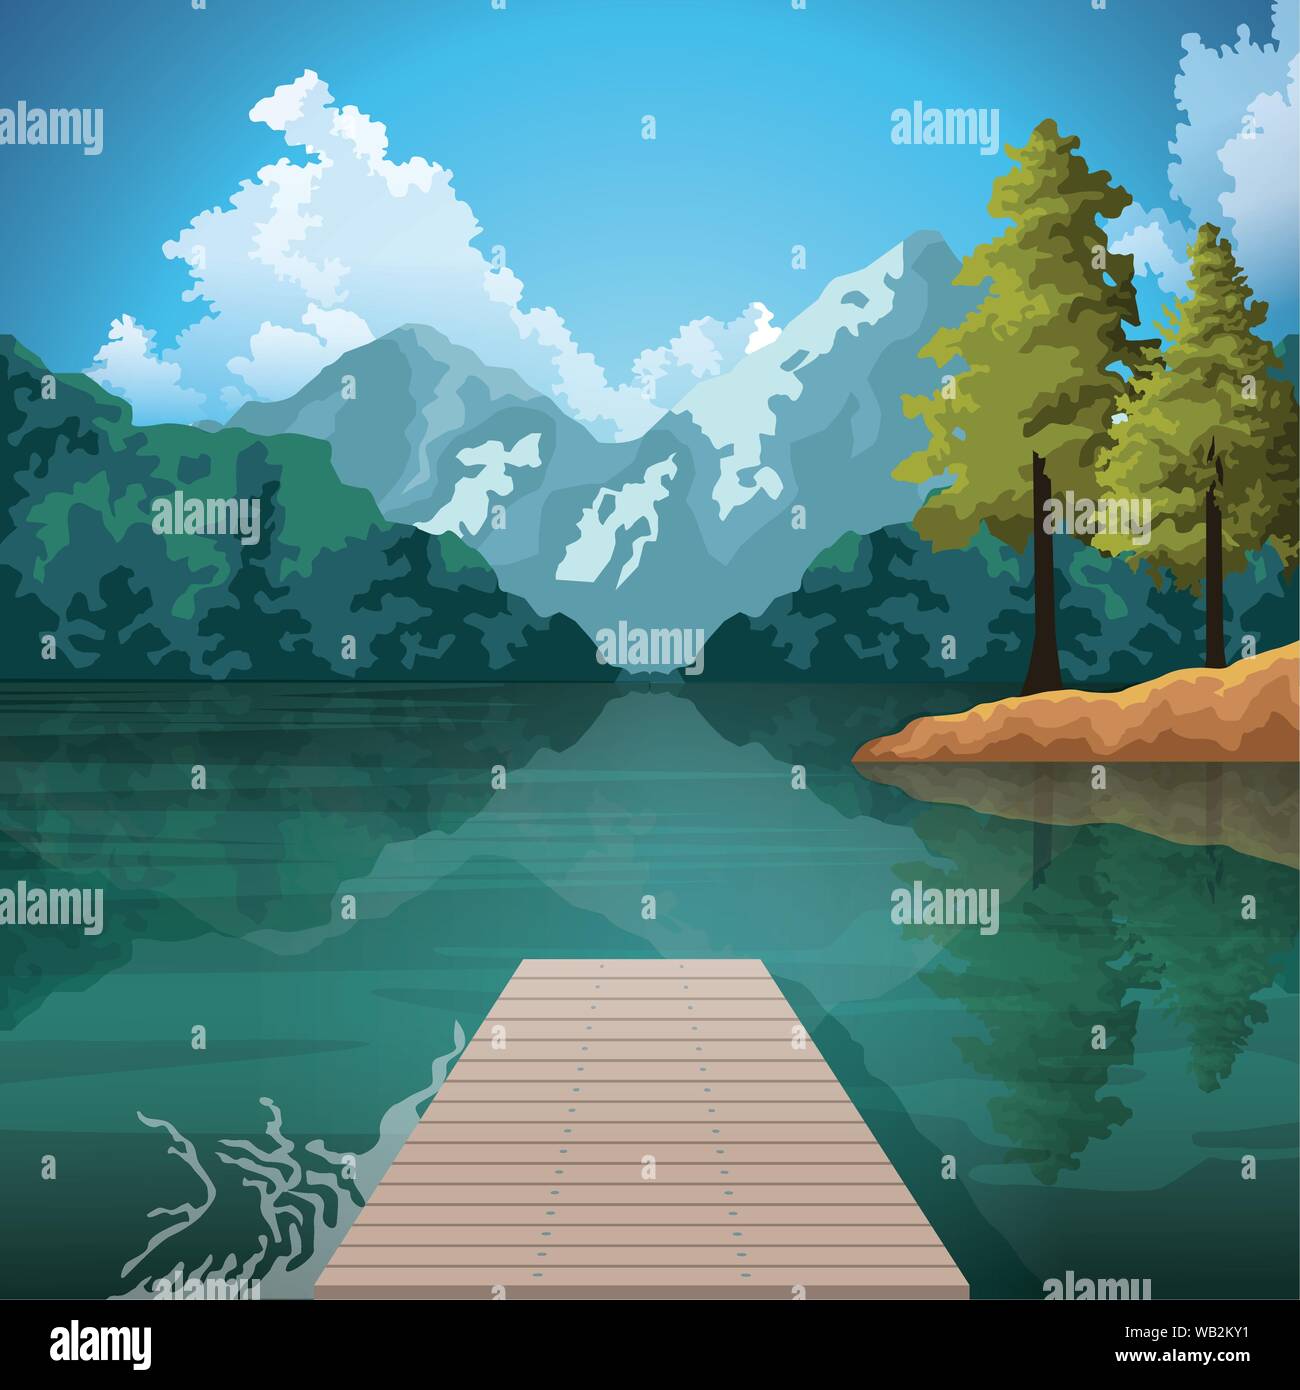 Beautiful nature landscape drawing scenery Stock Vector Image ...